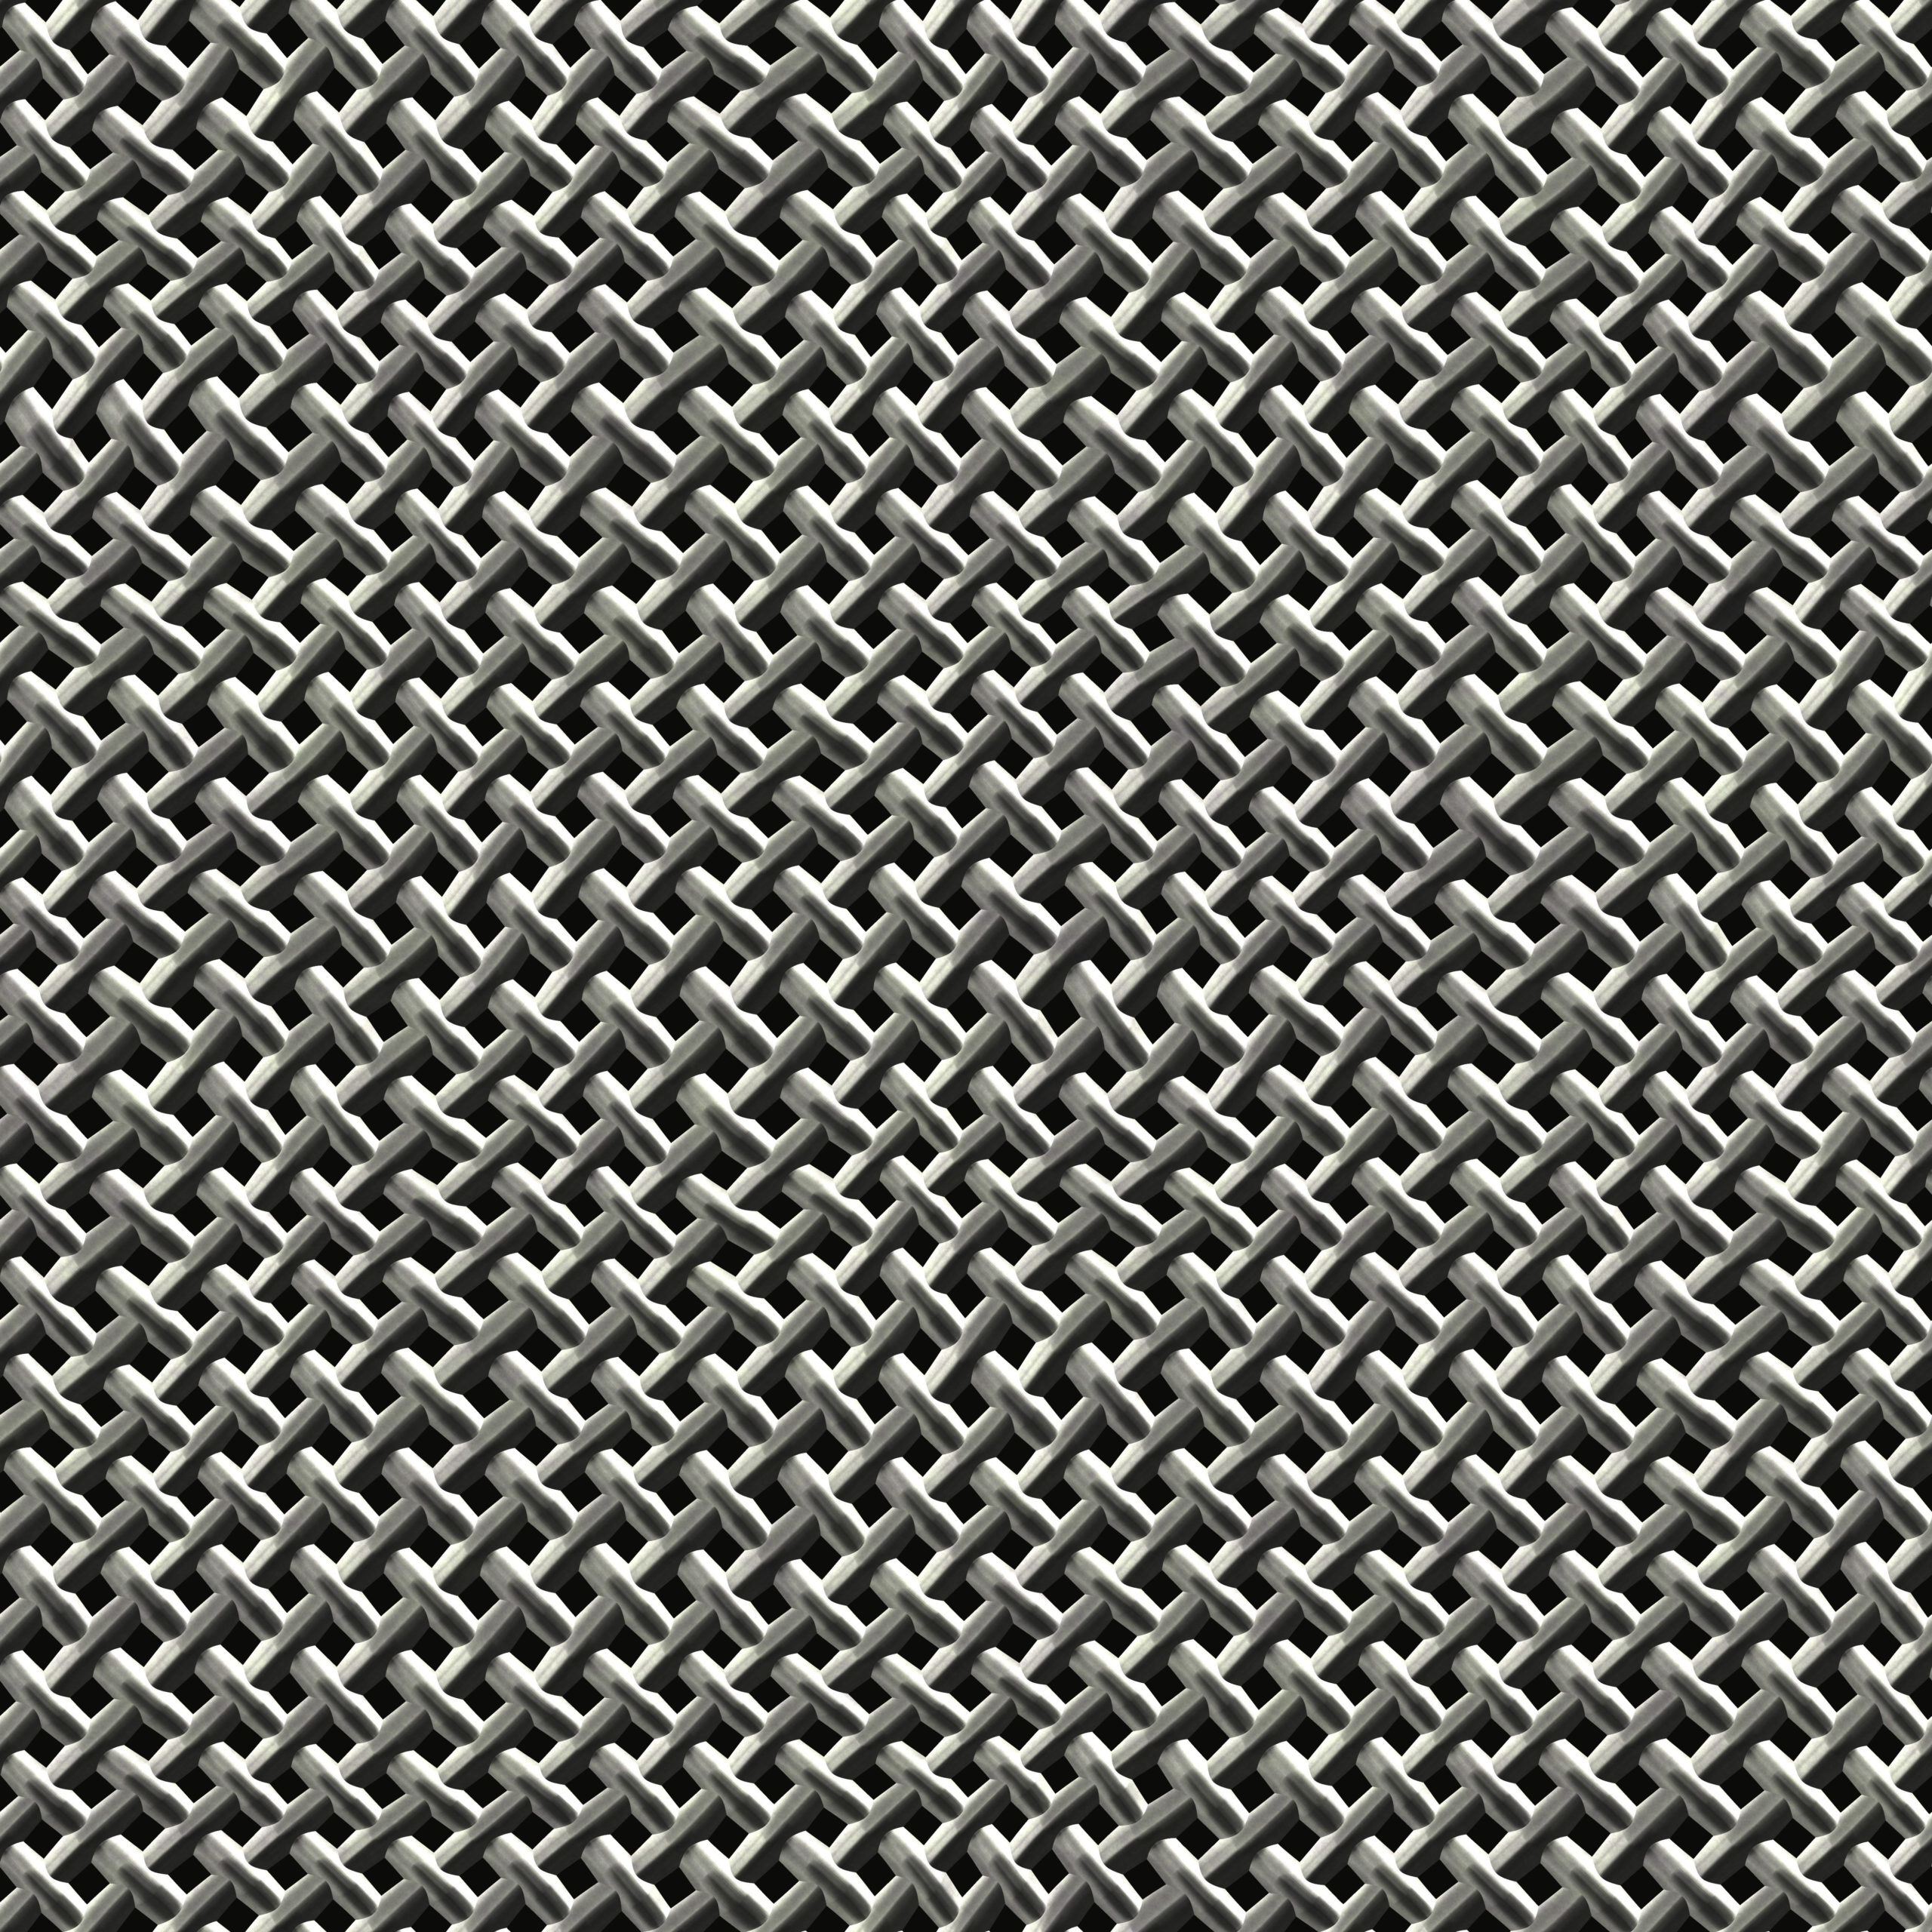 Steel wire mesh texture that tiles seamlessly as a pattern.